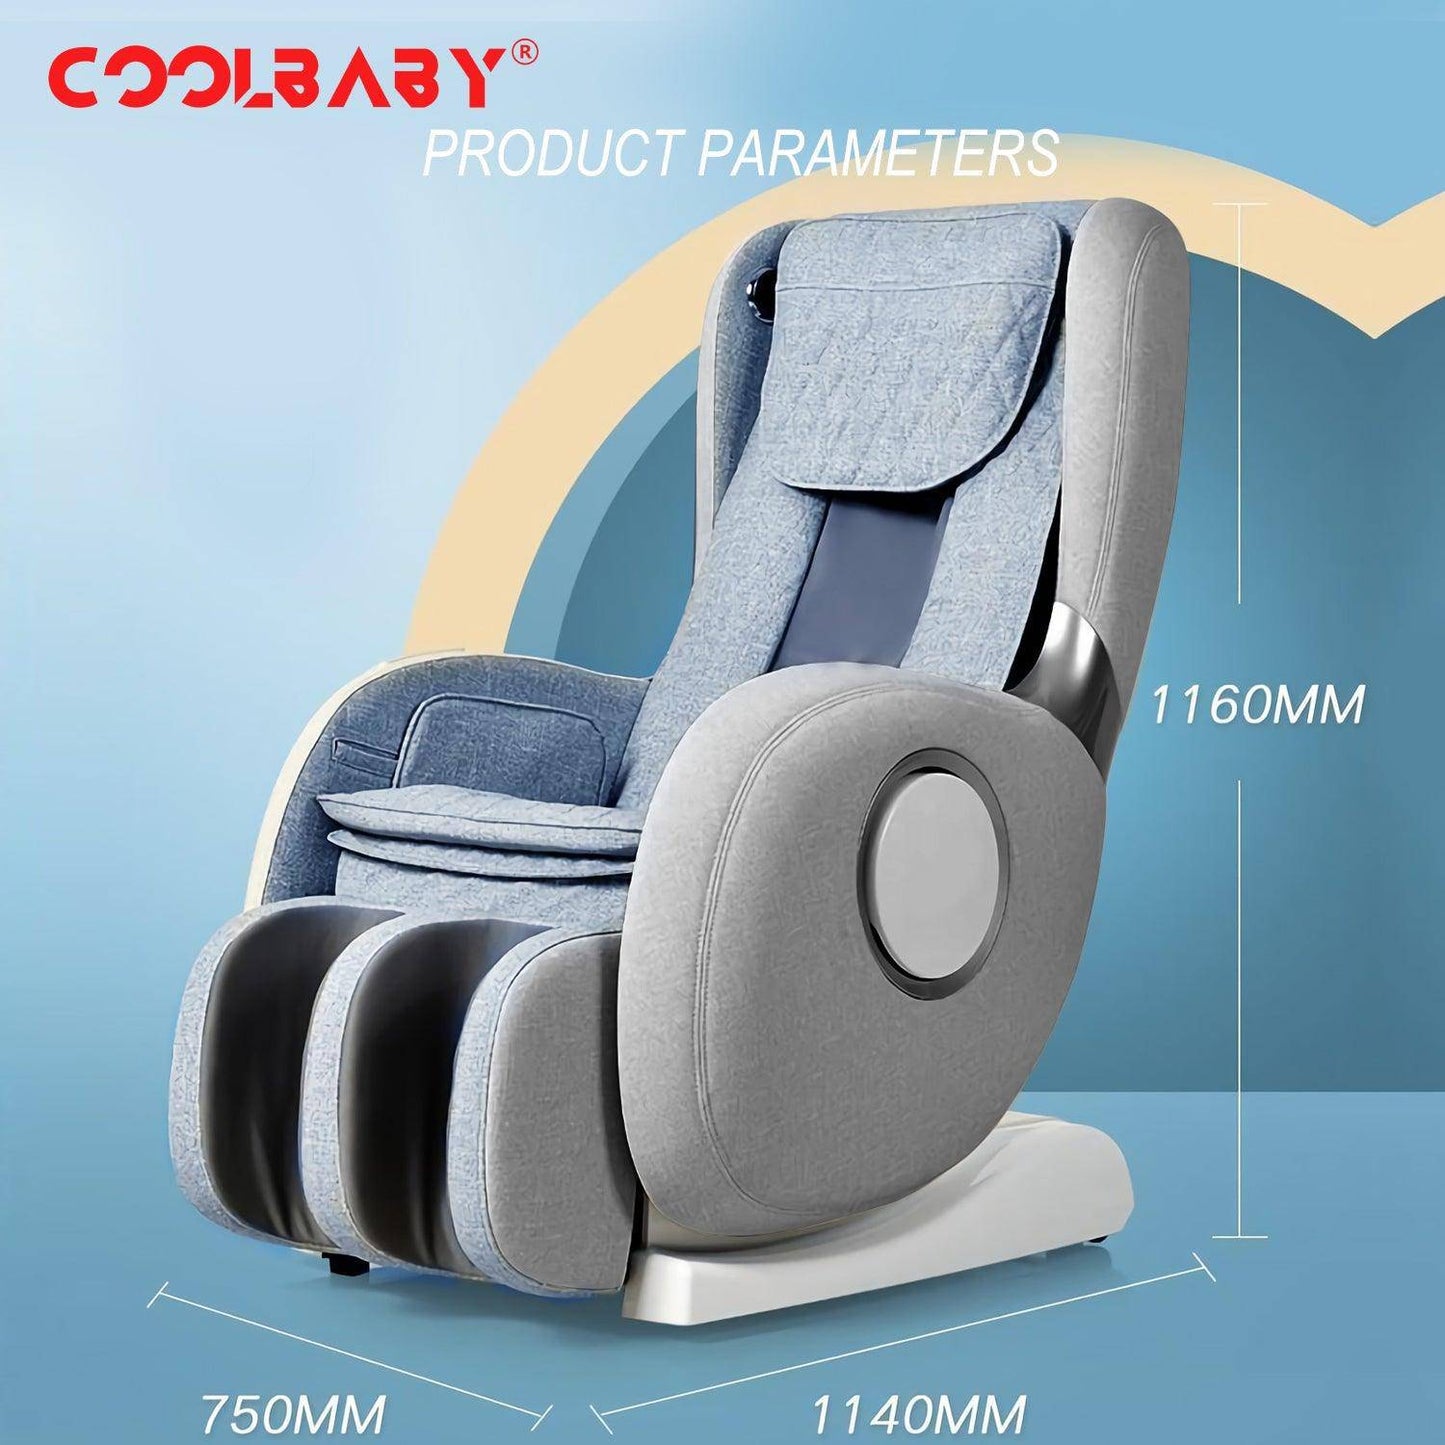 COOLBABY® RK-1911 Full-Automatic Multifunctional Electric Kneading Massage Chair Sofa - CoolBabyMass